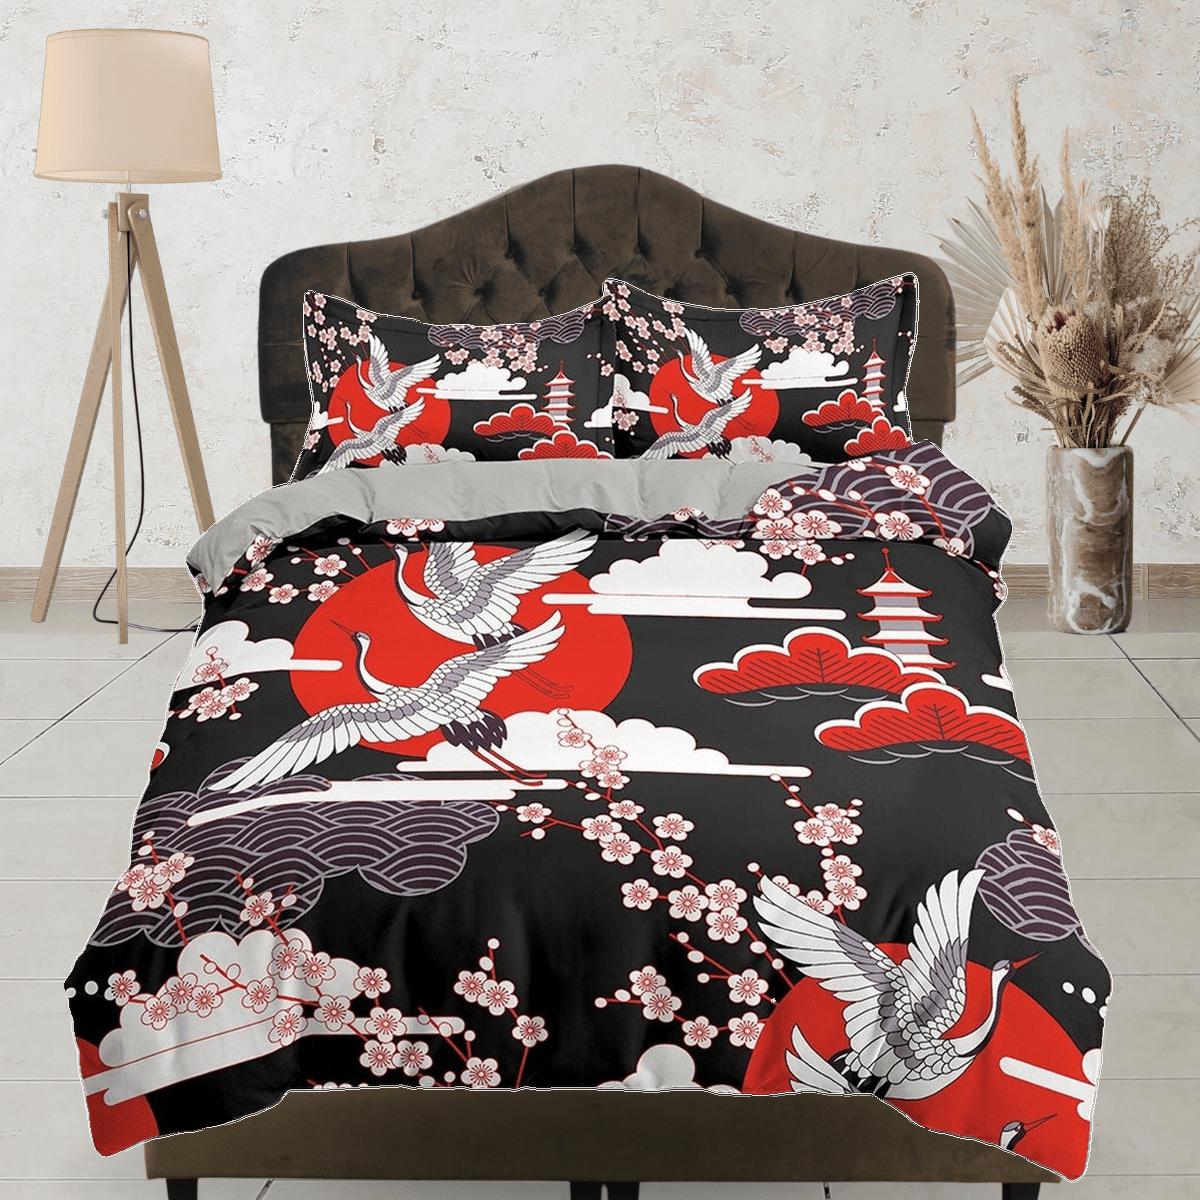 daintyduvet Black and red oriental bedding set cover, crane bird and cherry blossom prints on Japanese style duvet cover, king, queen, full, twin